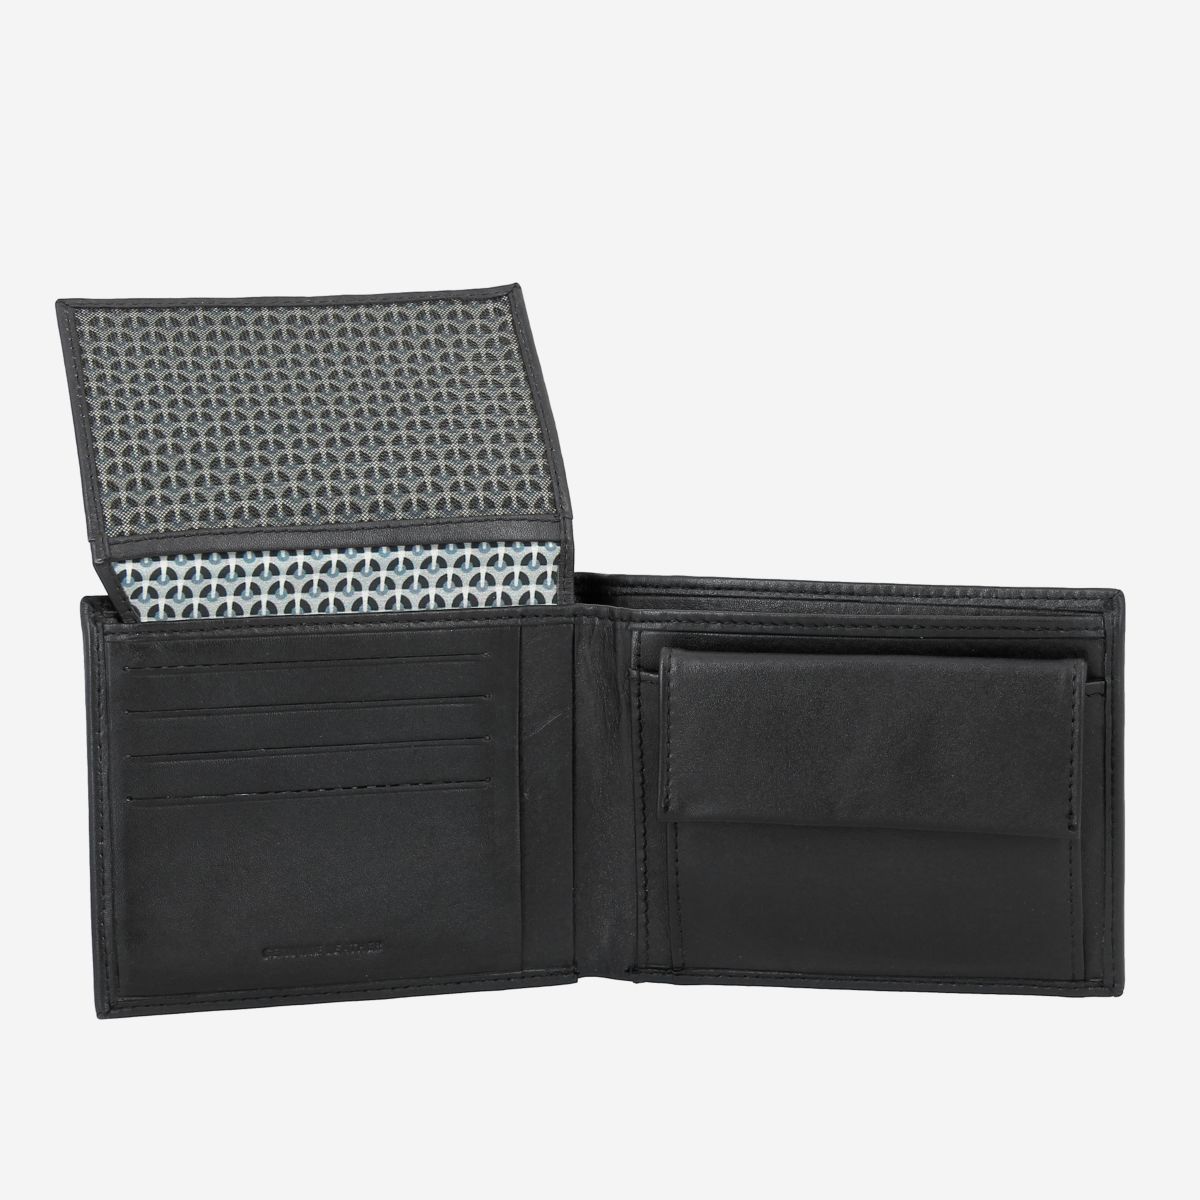 Buy Men's Leather Wallets| Pikolinos Official Online Store